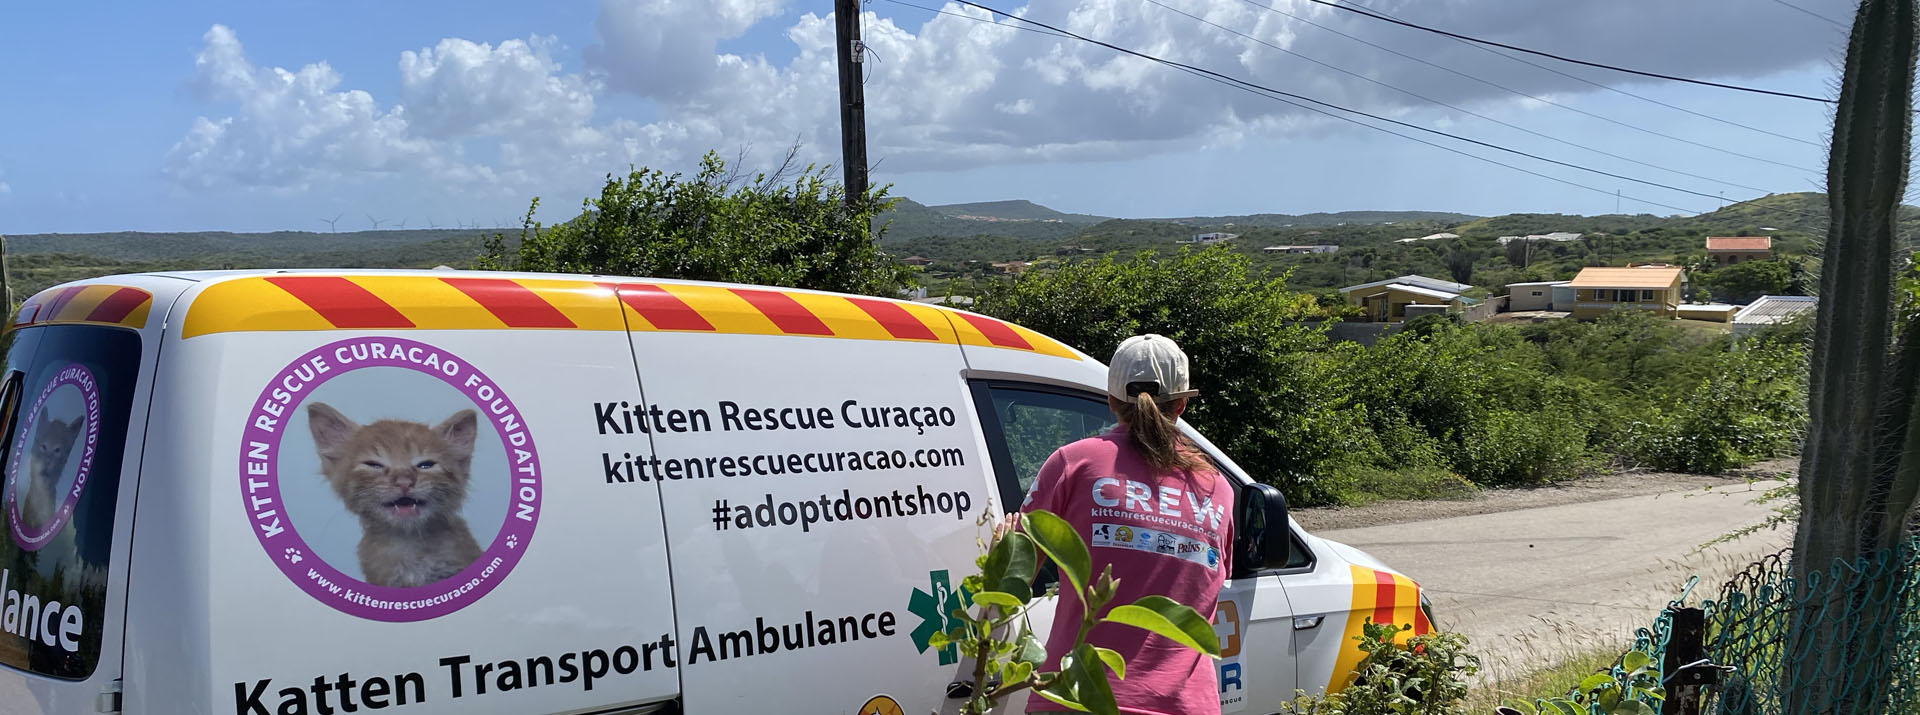 Stichting Kitten Rescue Curacao